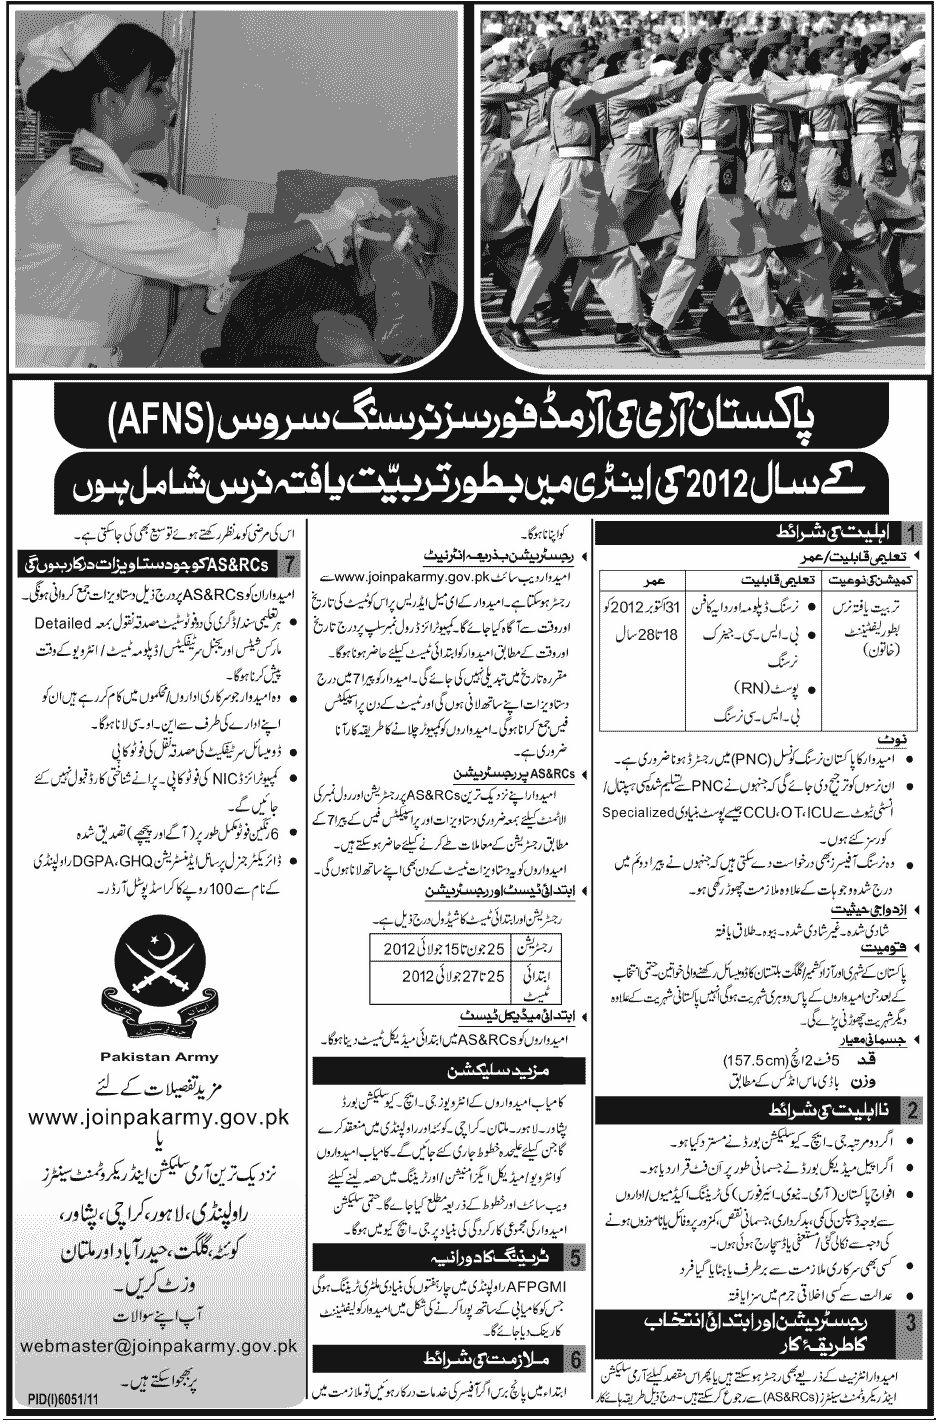 Join Pakistan Army asa Nurse Commissioned Officer in AFNS (Armed Forces Nursing Service) (Govt. job)